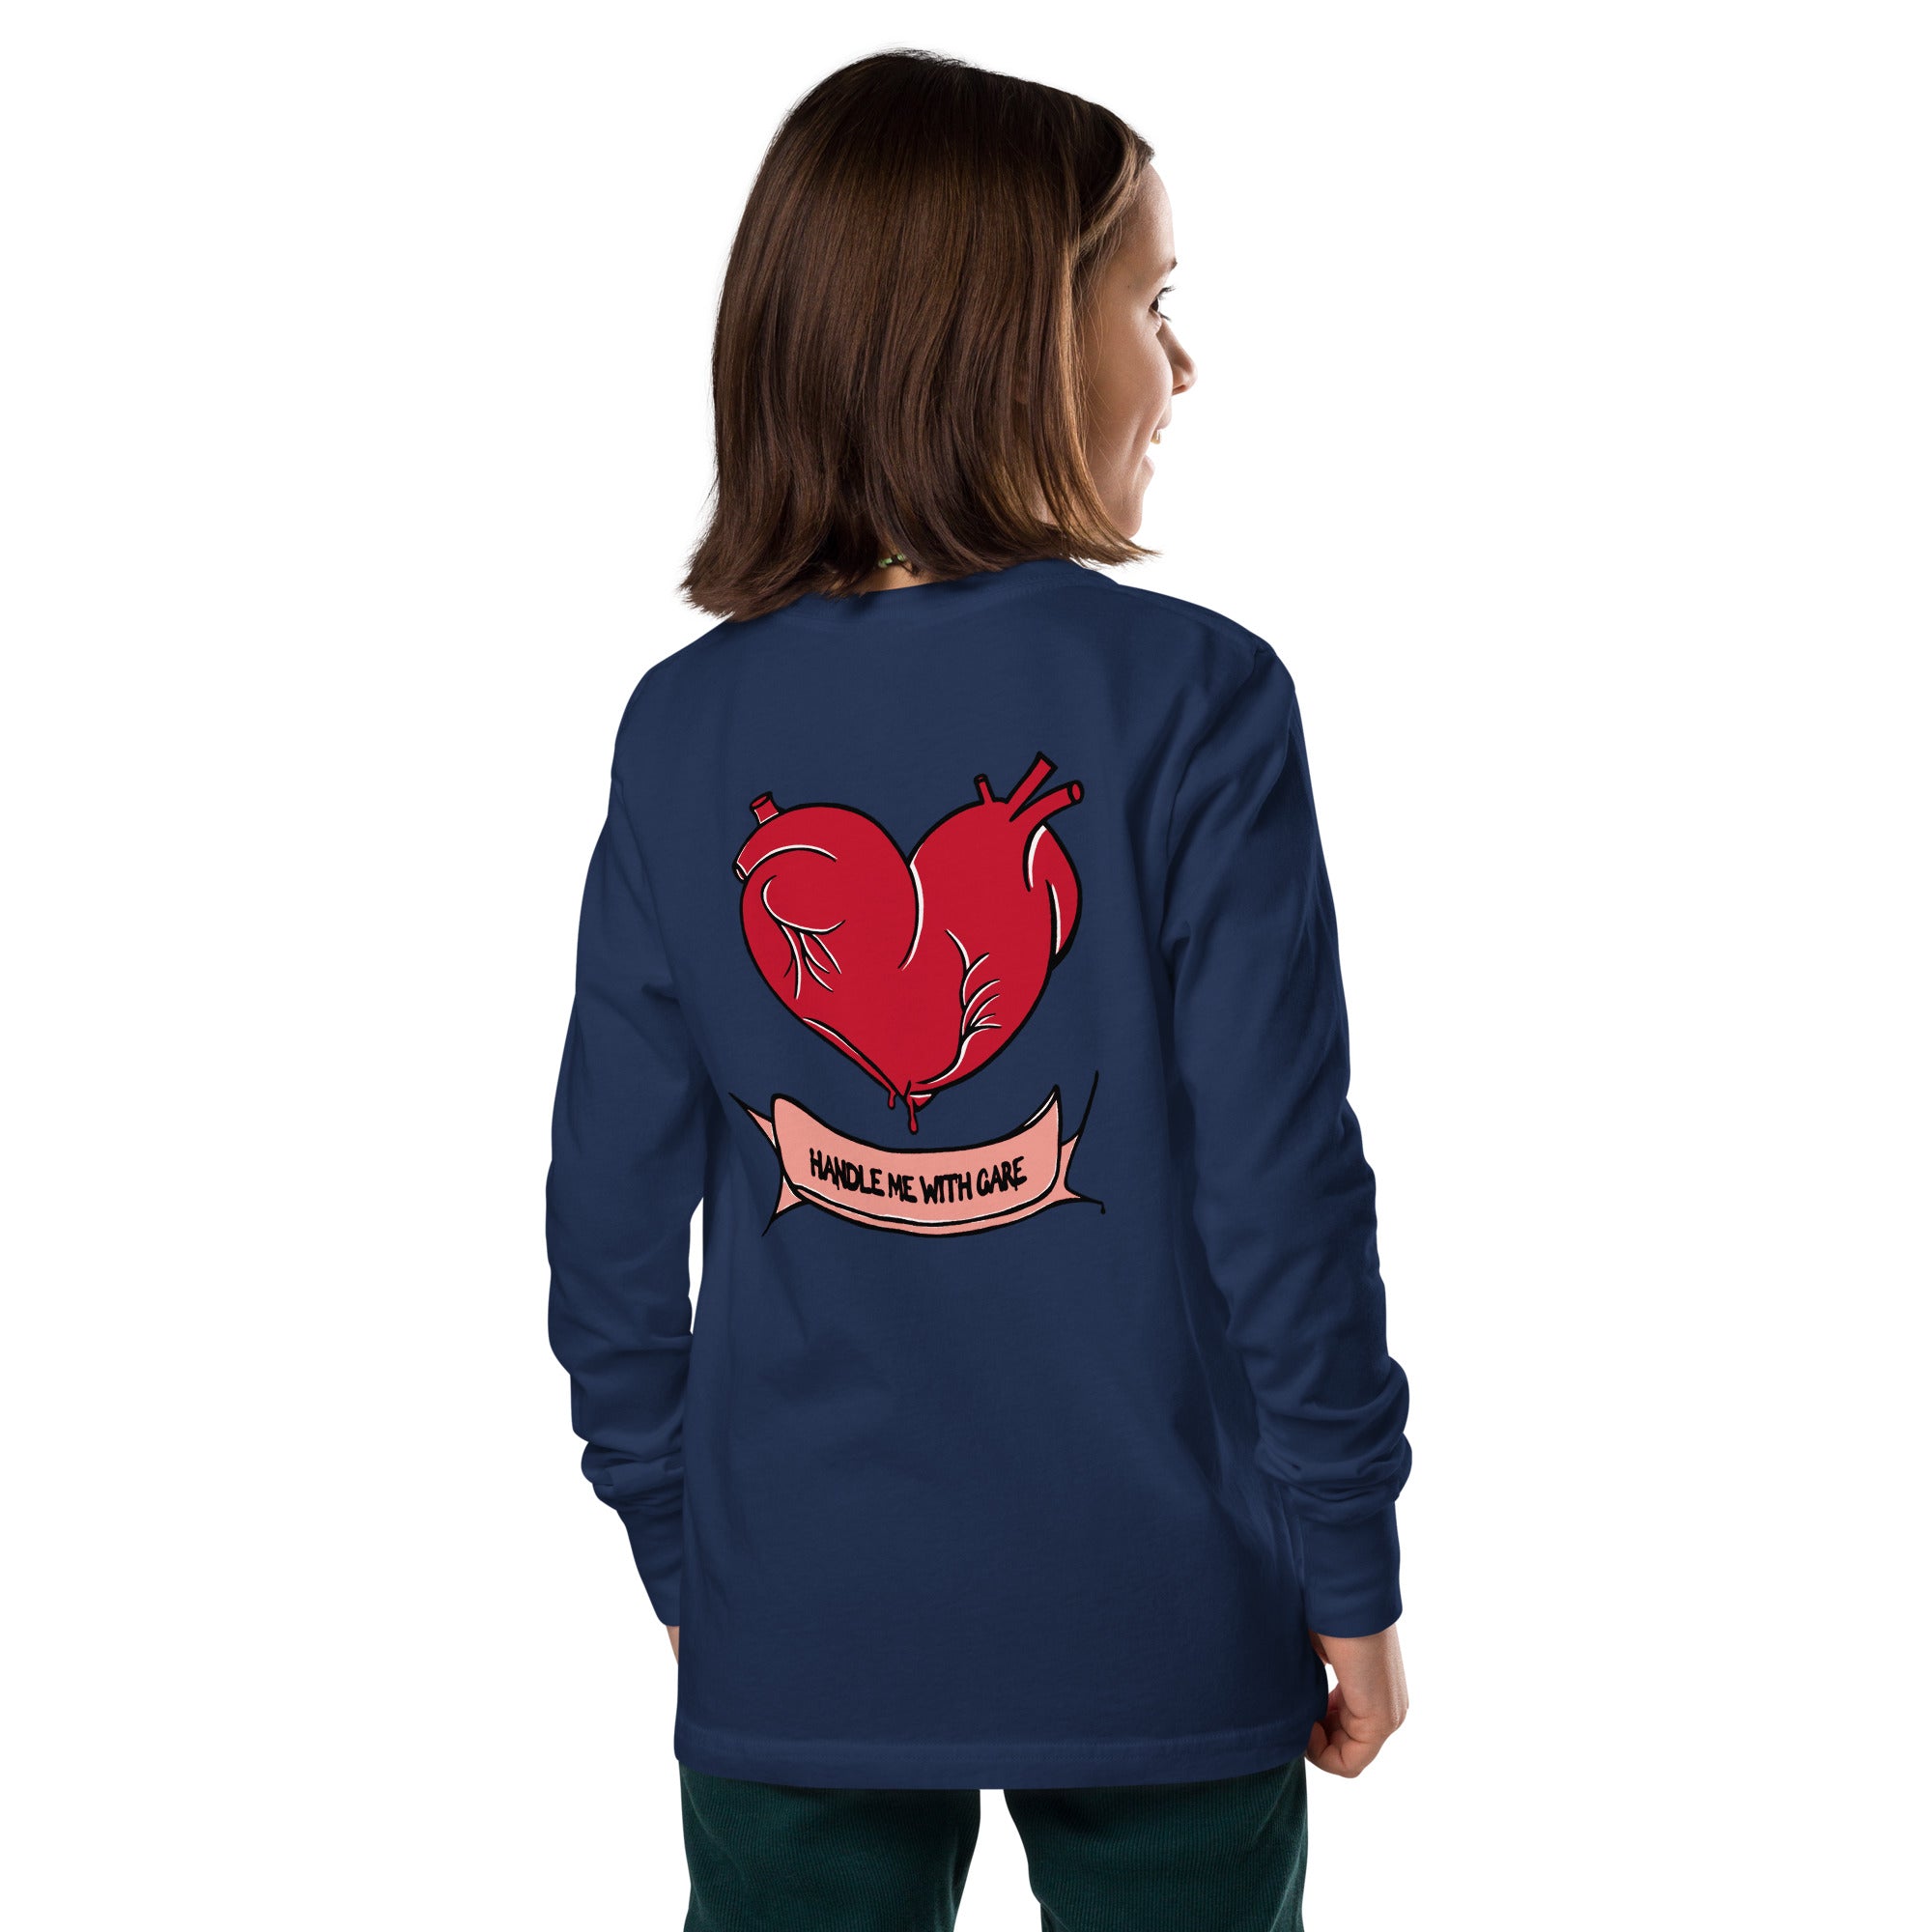 Handle Me With Care Youth long sleeve tee